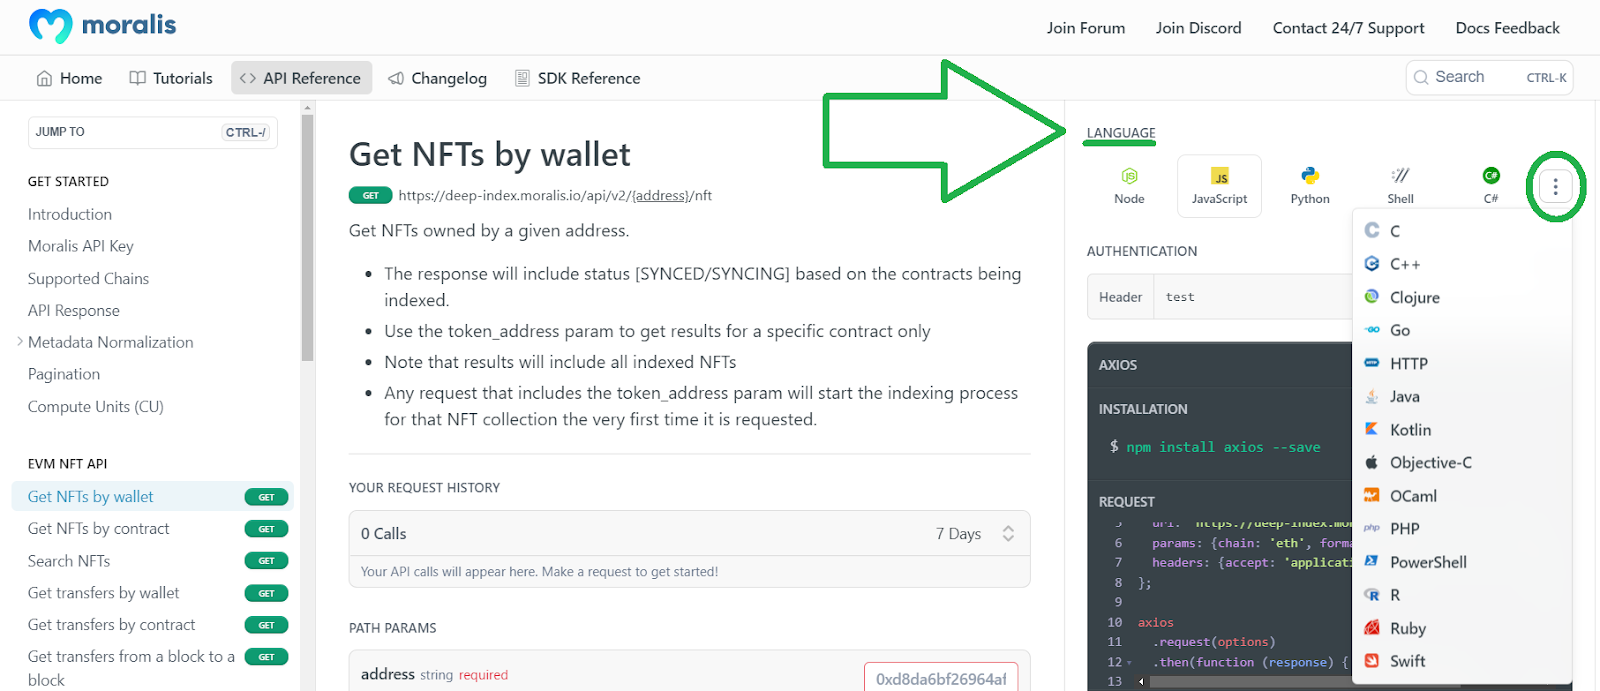 get nfts by wallet documentation page